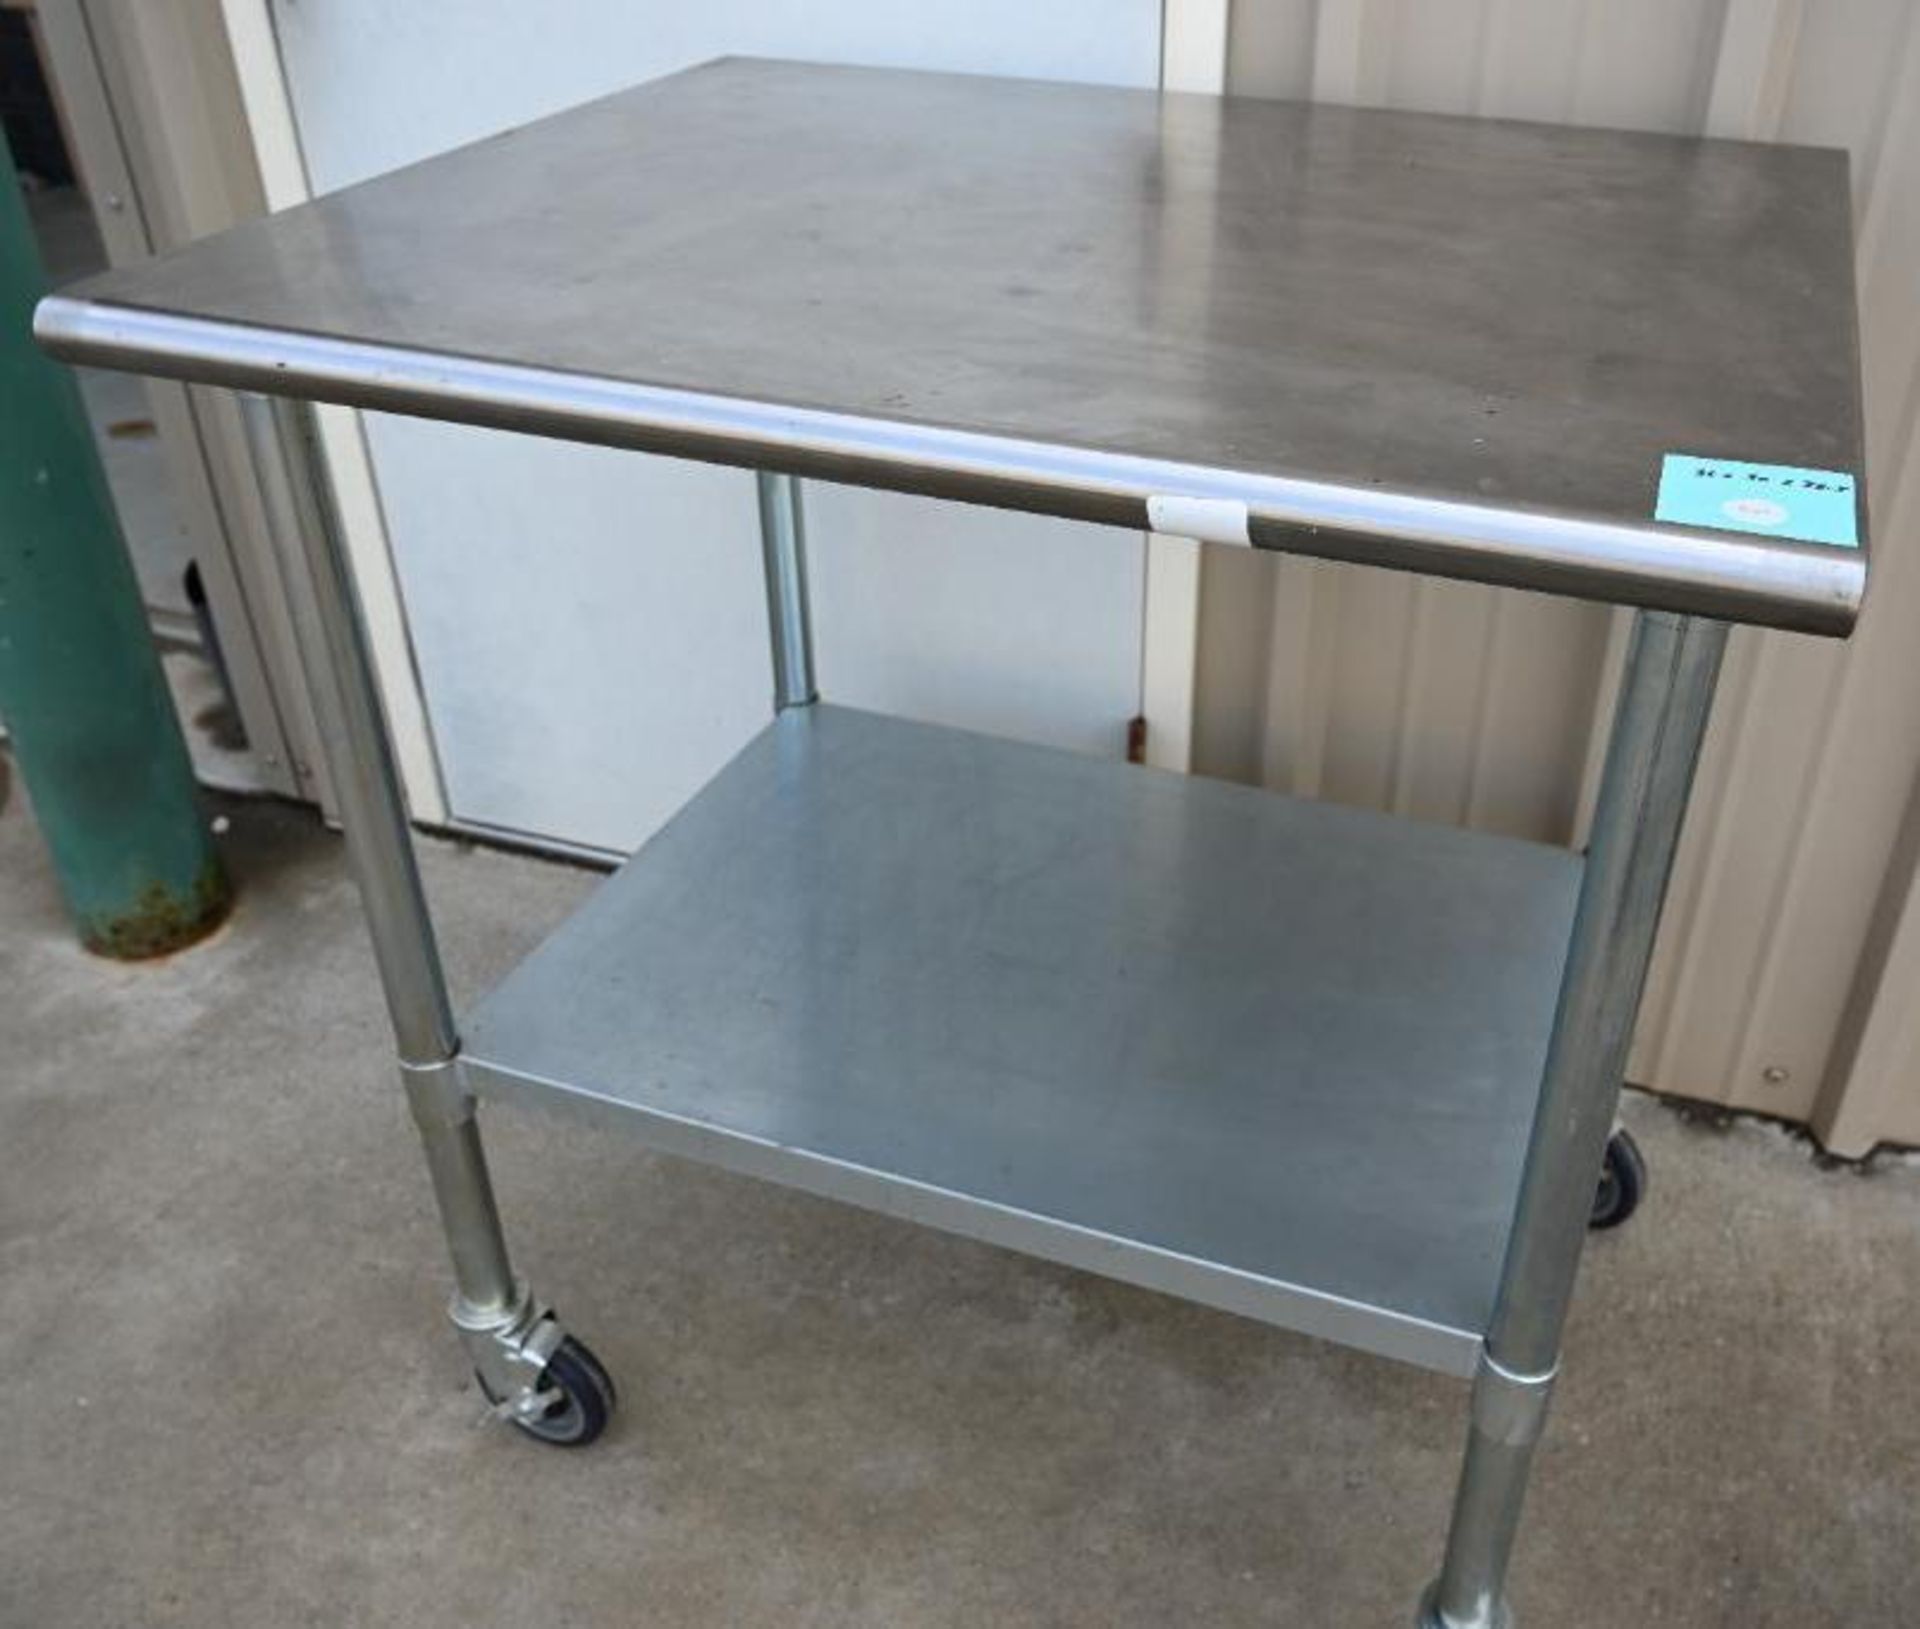 NSF Stainless Steel Work Table with Casters - Image 5 of 8